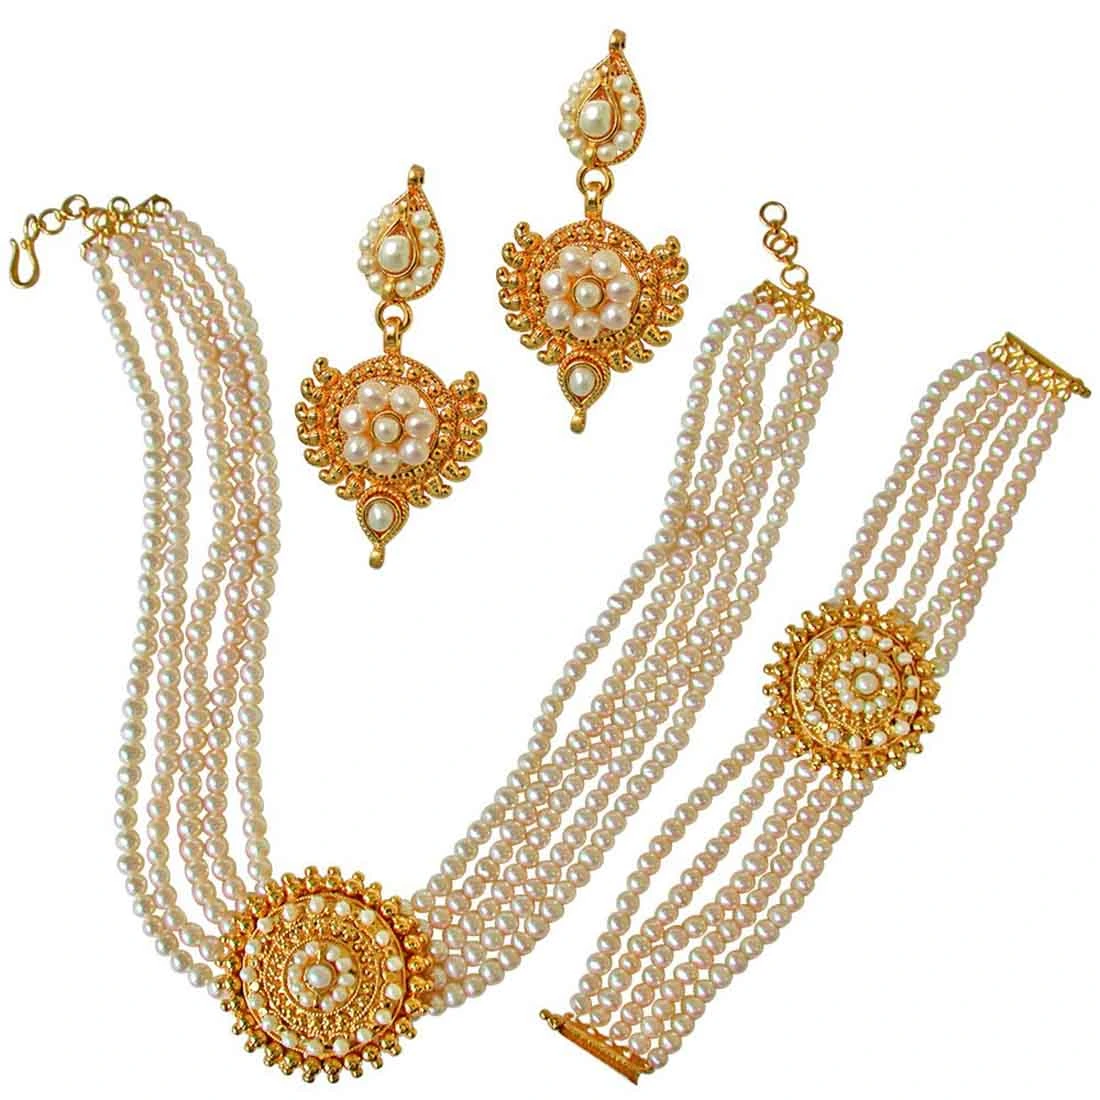 Shringar Special - Traditional Round Shaped Real Freshwater Pearl & Gold Plated Pendant Necklace, Bracelet & Earring Set for Women (SP127)